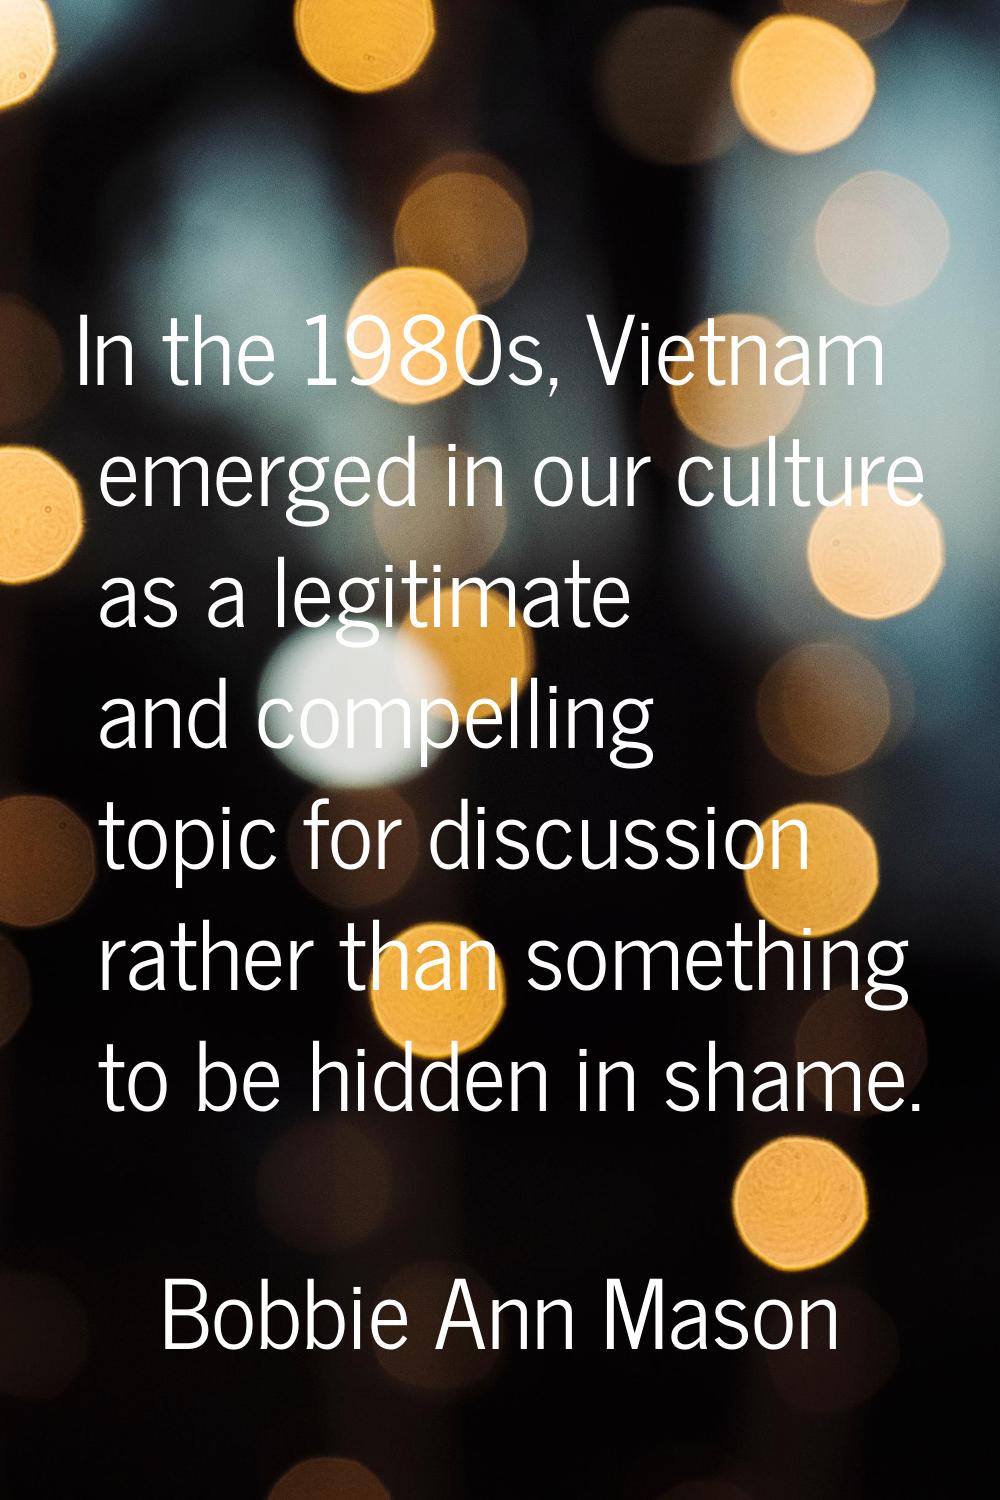 In the 1980s, Vietnam emerged in our culture as a legitimate and compelling topic for discussion ra